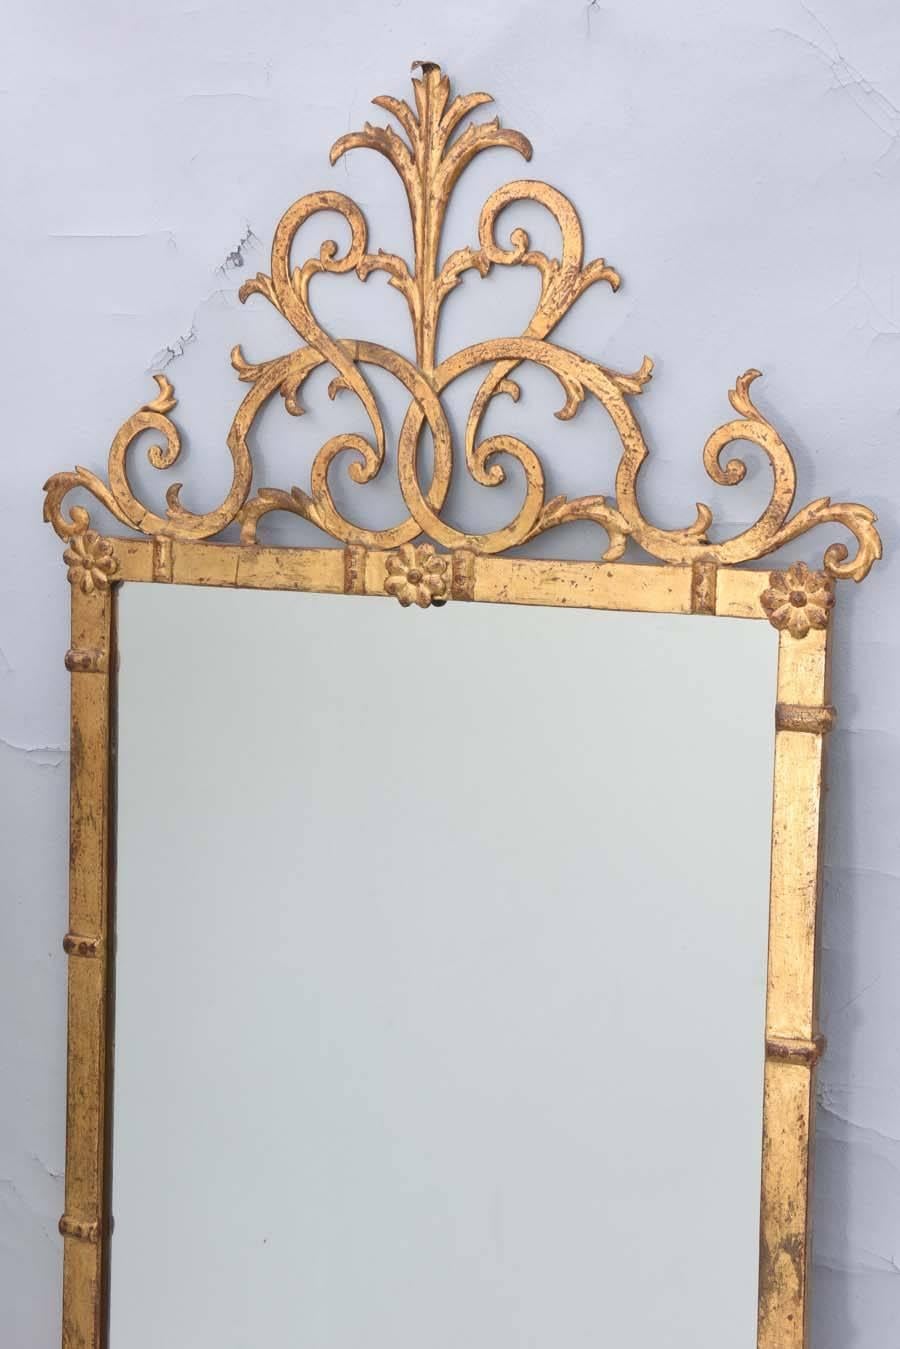 Wall mirror, having a rectangular plate in frame of gilded iron decorated by bars and flourished corner-pieces, surmounted by elaborate pierced scrolling pediment of acanthus and curls. Impressed mark on back, "Palladio".

Stock ID: #D9308